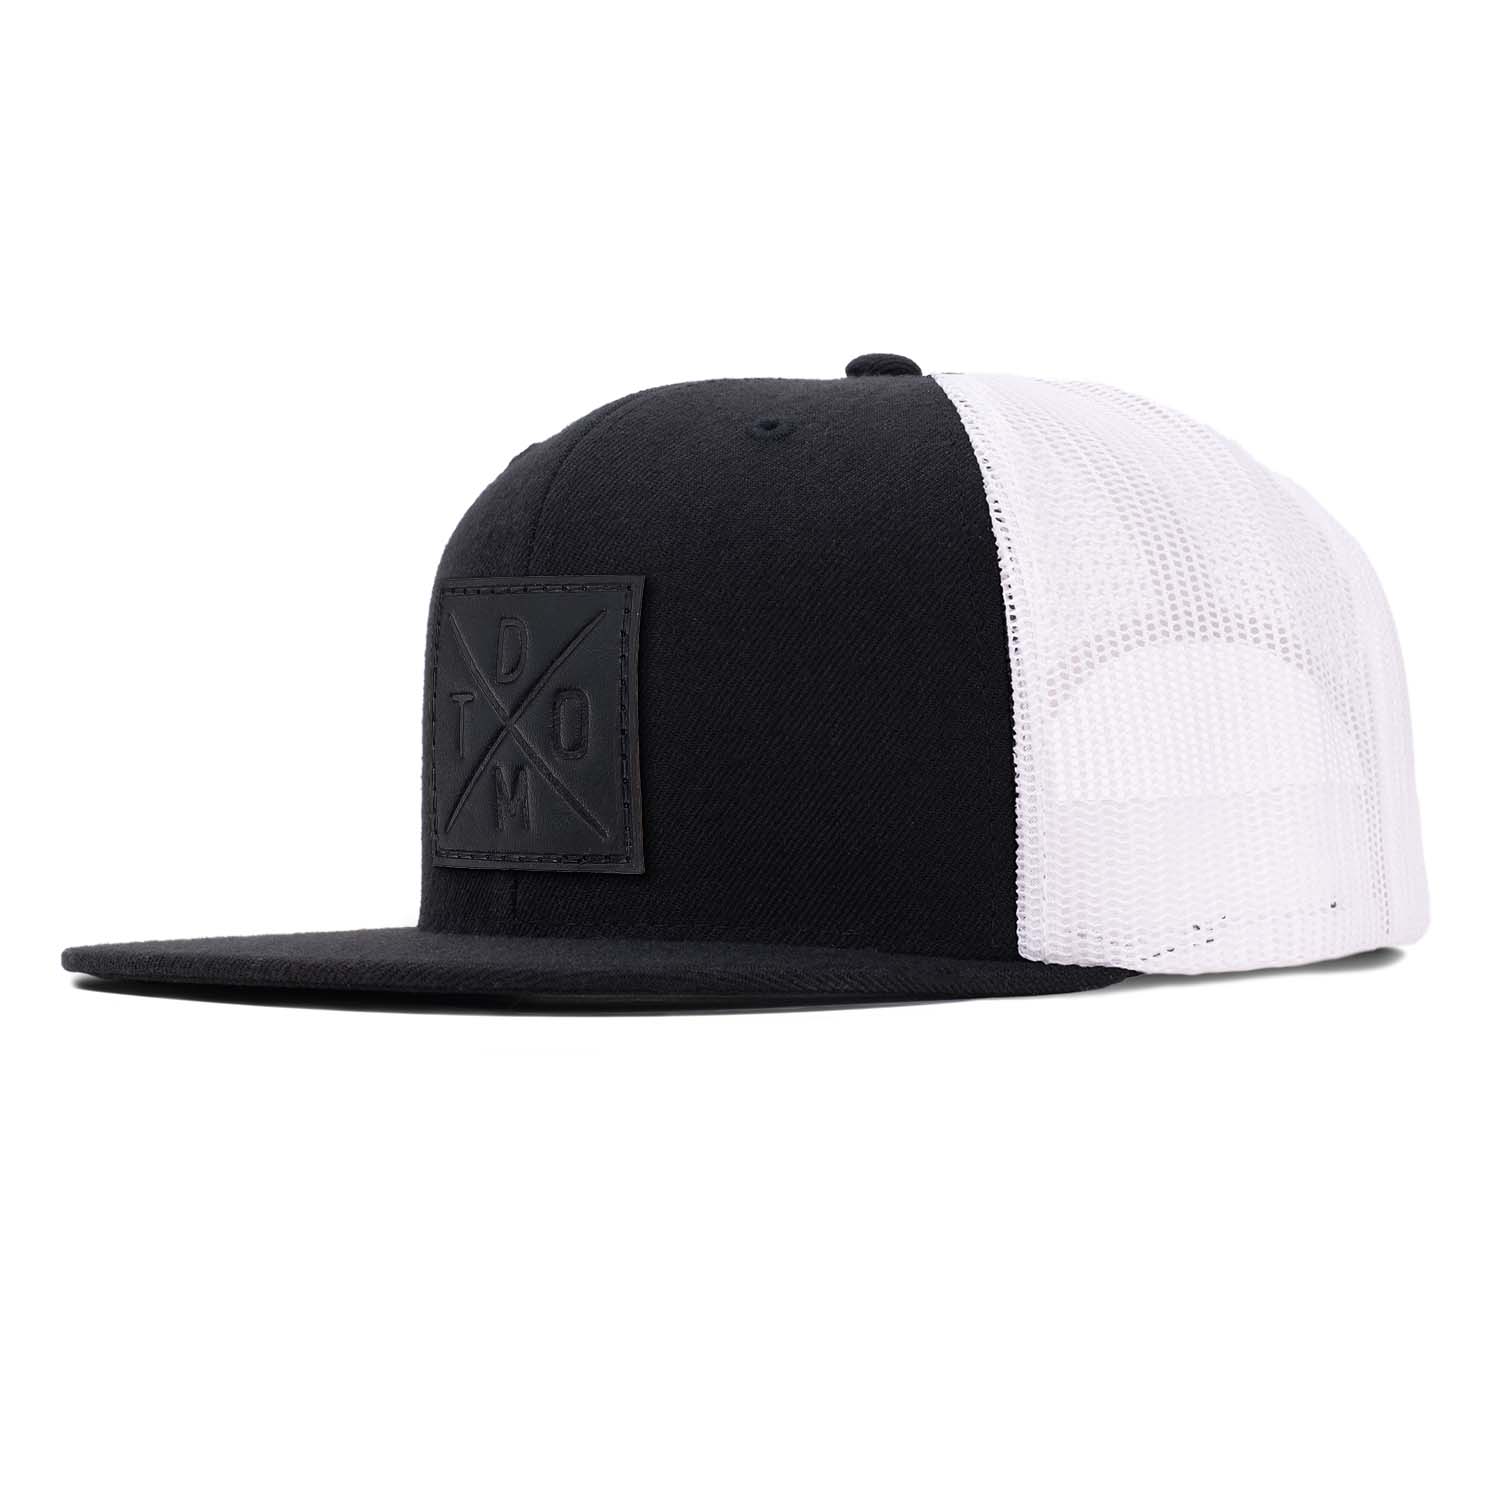 Black full grain leather debossed square DTOM patch on a black flat bill hat with white mesh